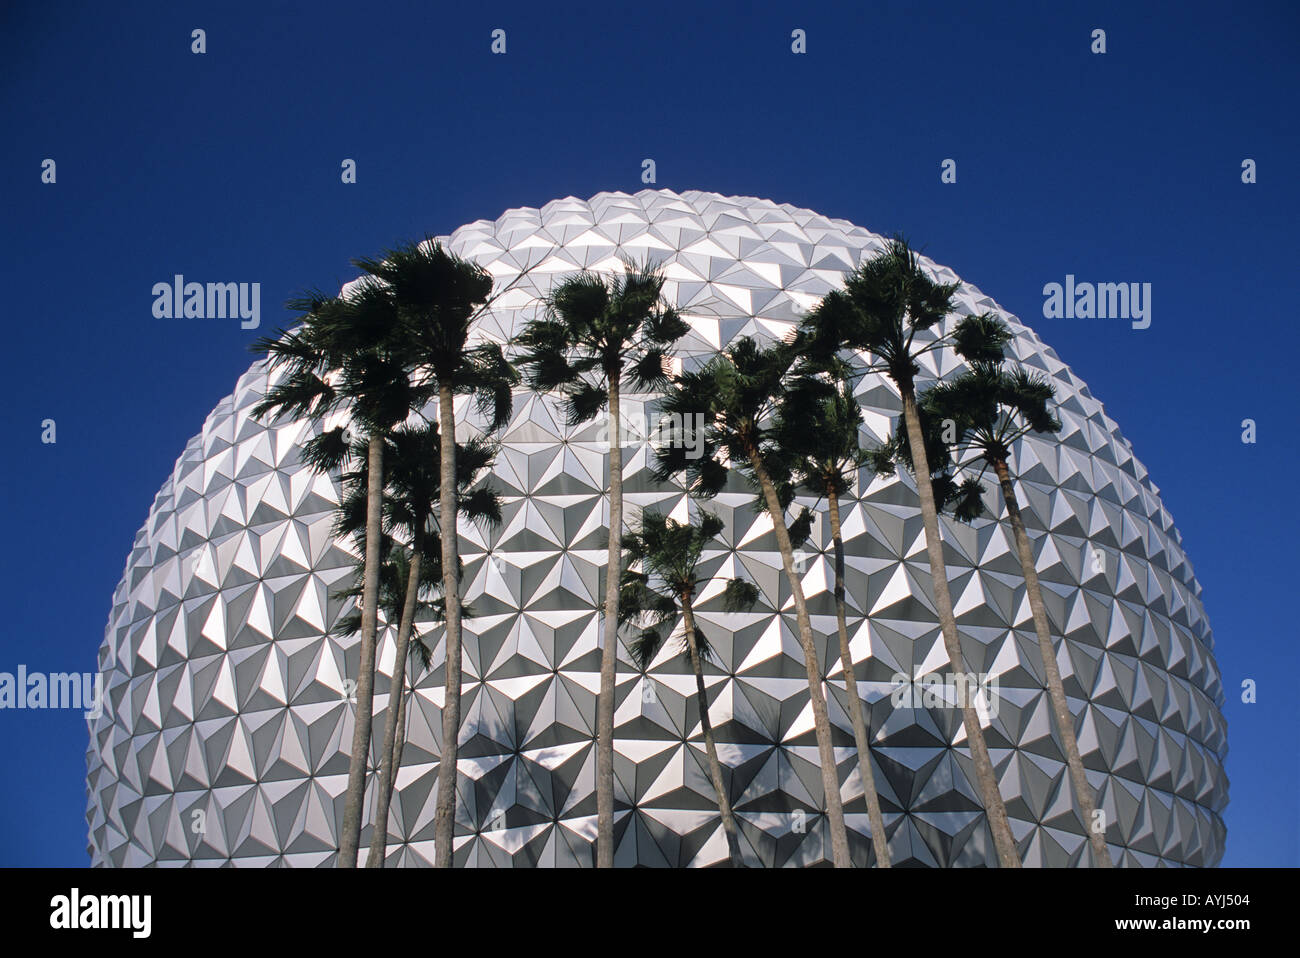 The exterior of the geosphere Spaceship Earth at the entrance of Epcot Center Disney World in Orlando Florida with palm trees  Stock Photo